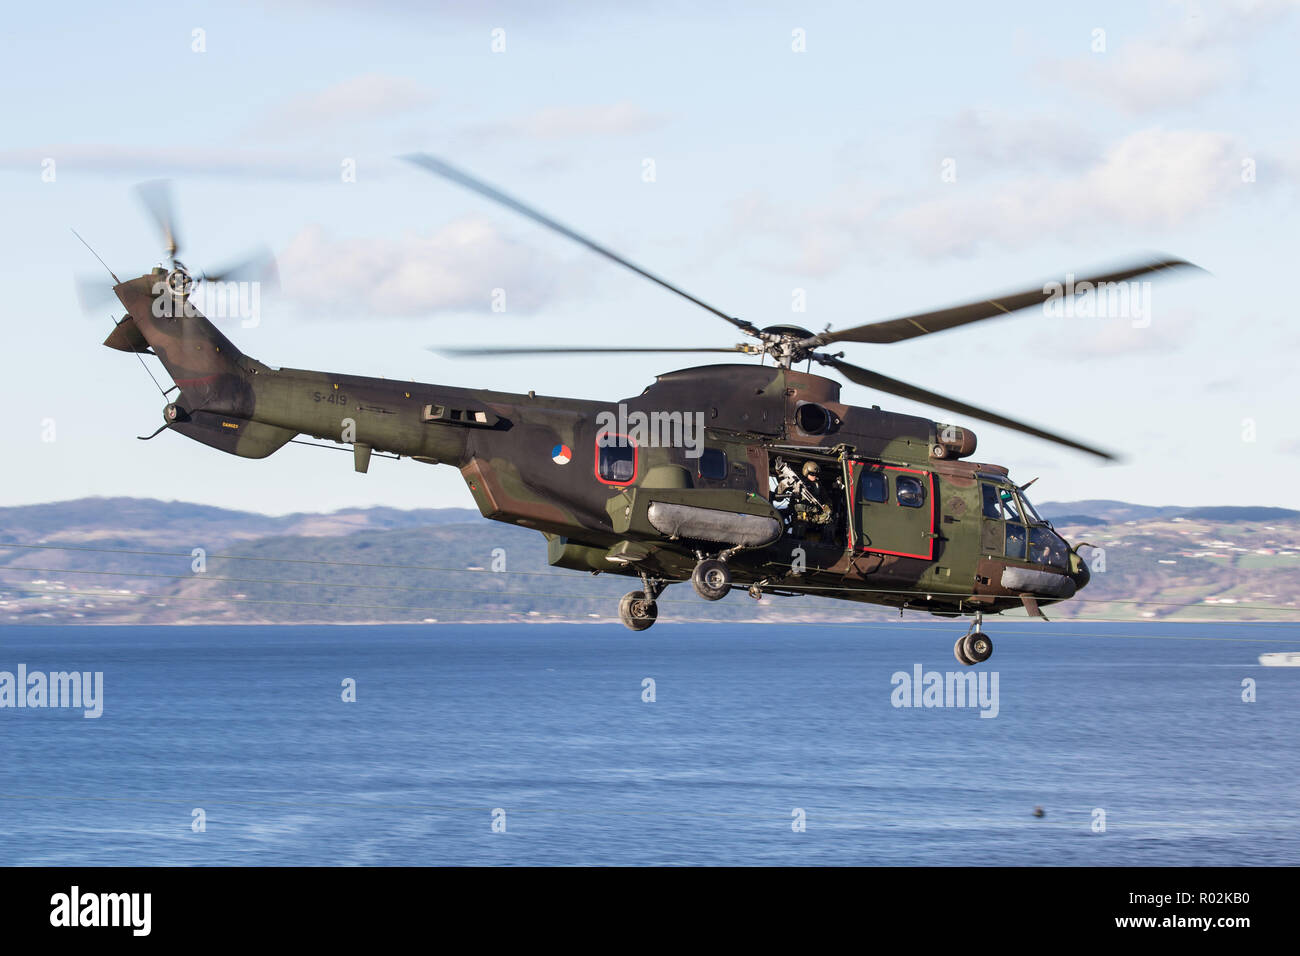 A Dutch AS532 Super Puma helicopter securities the landing of infantrymen  on the beach of Trondheim Fjord, in Norway, during exercise Trident  Juncture 18. With around 50,000 personnel participating in Trident Juncture